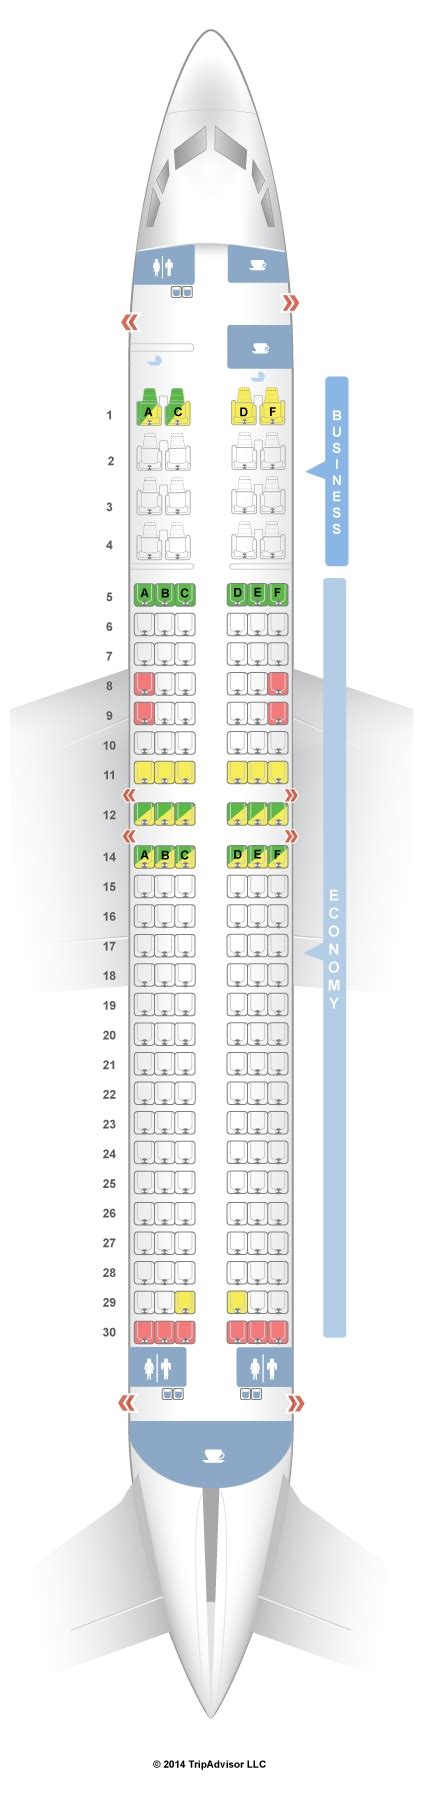 Images American Airlines Plane Seating Chart And Description